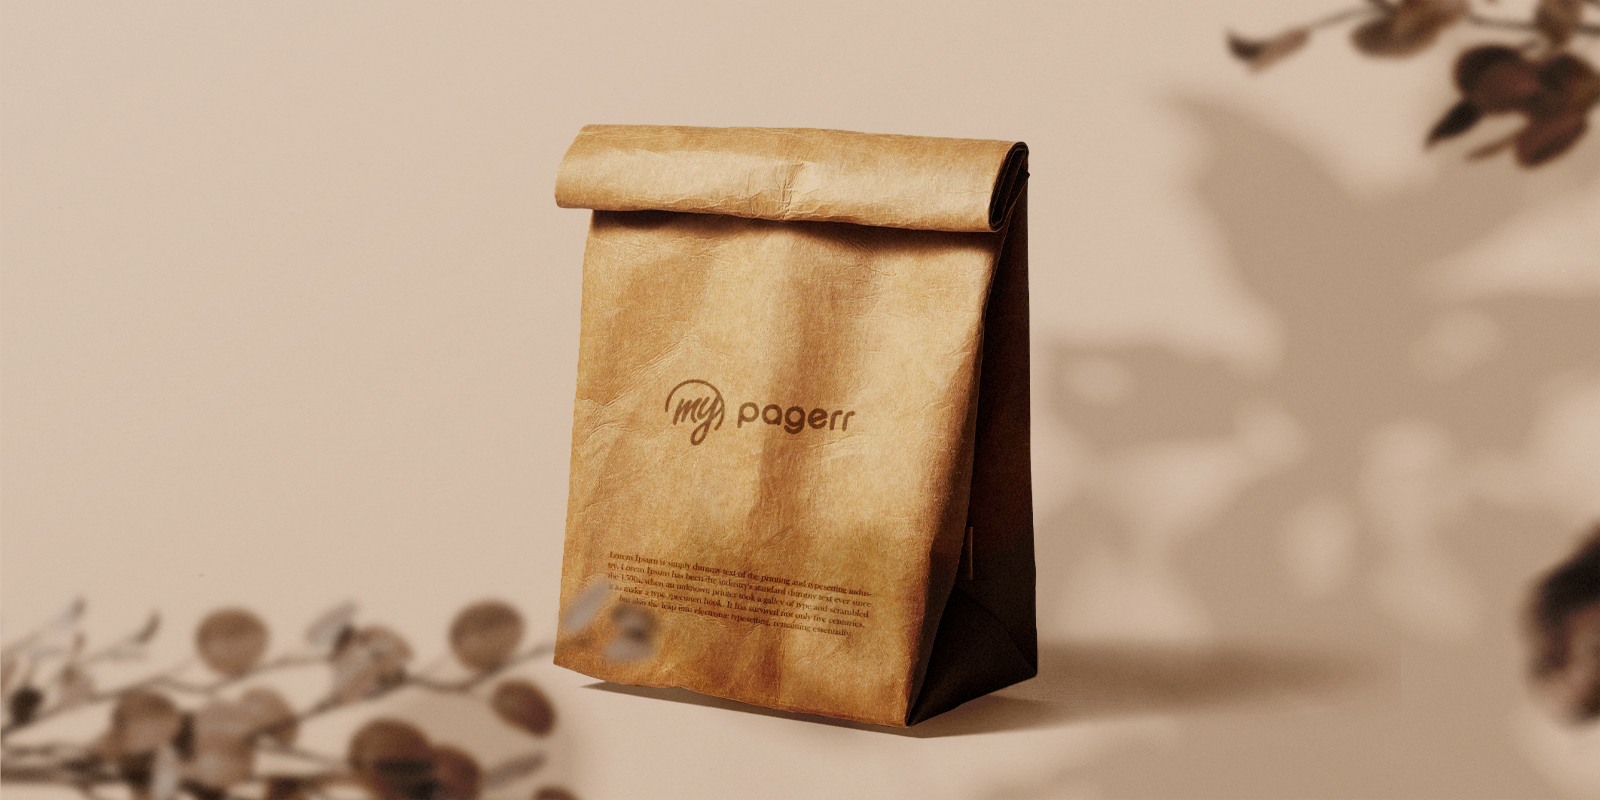 Kraft paper bags in Paris - Print with Pagerr